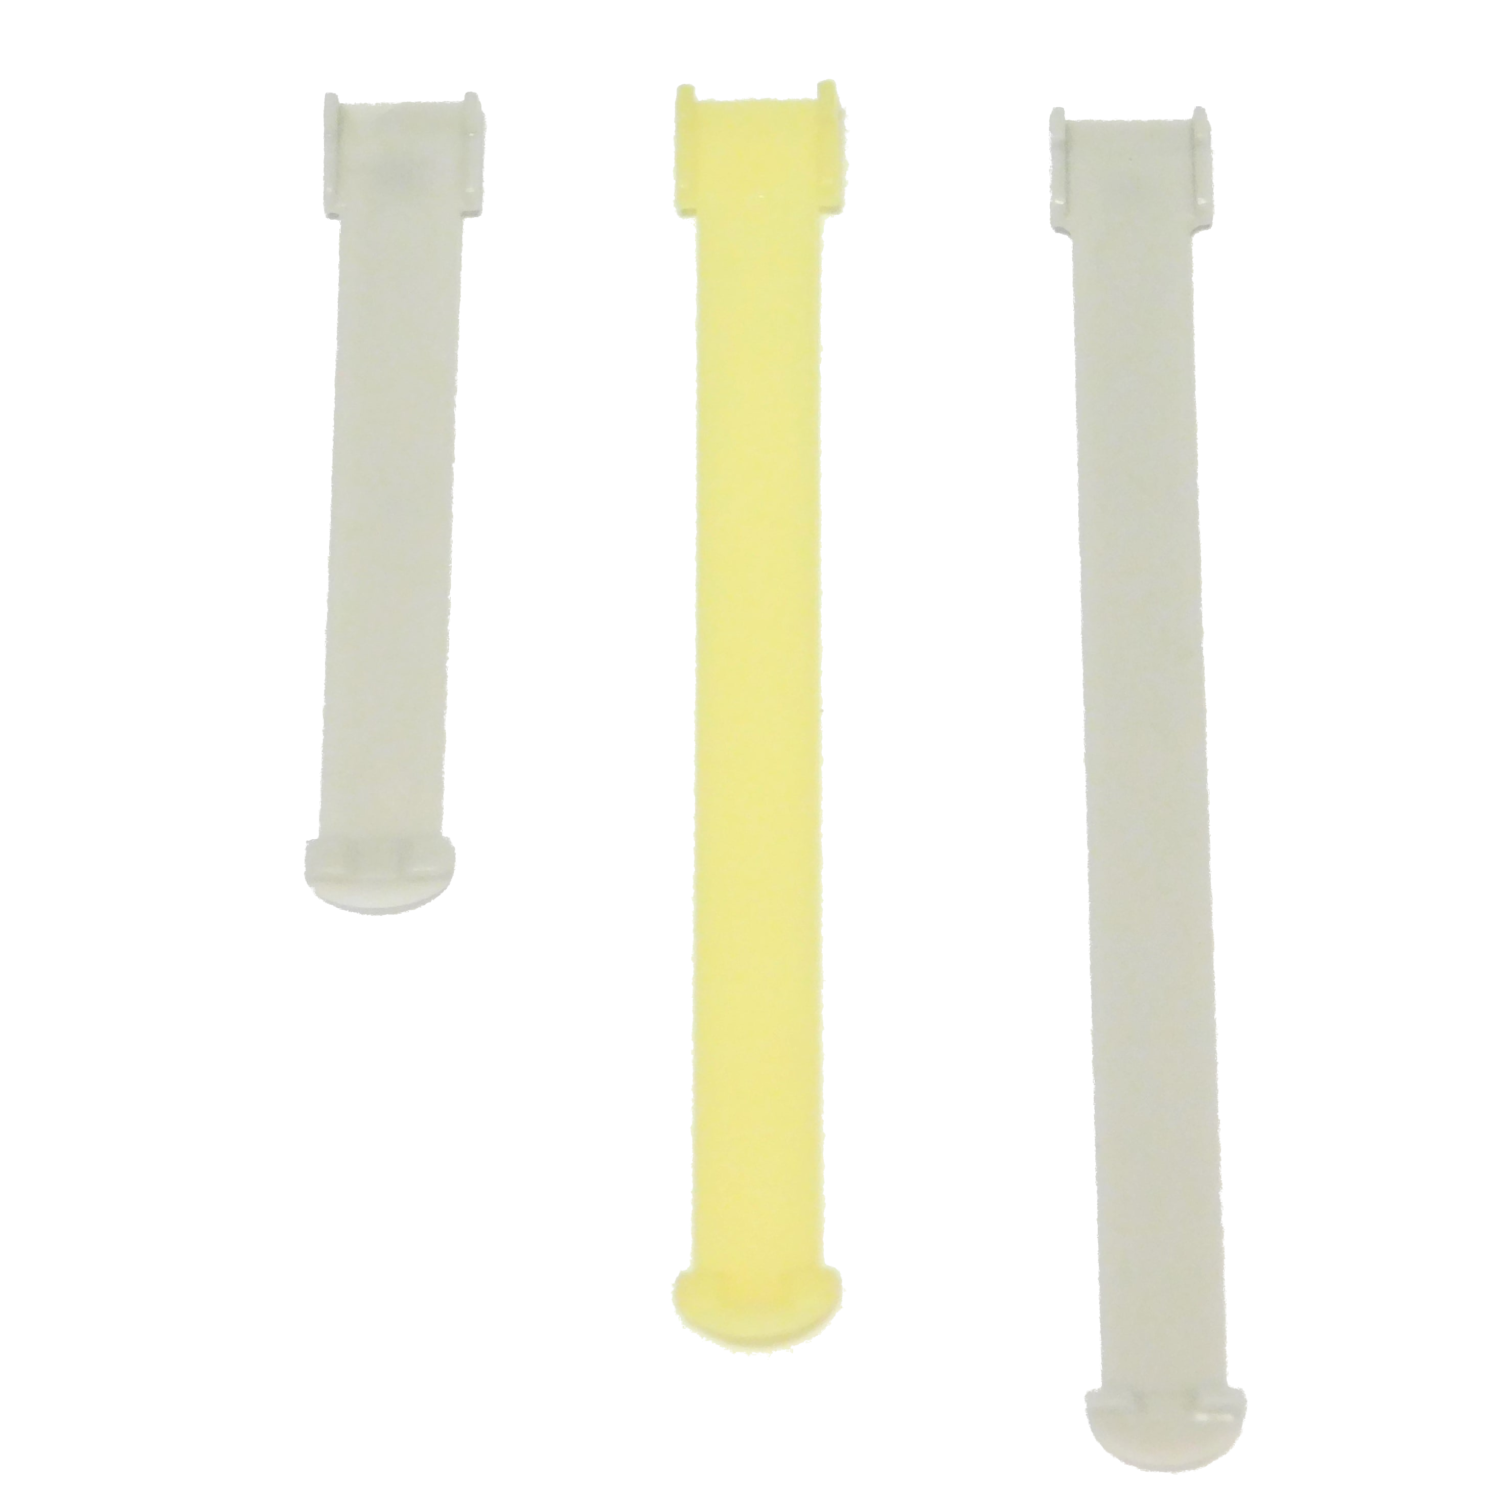 25 Carriers in a Roll With 79mm Plastic Spacer for Vertical Blinds/Shades 